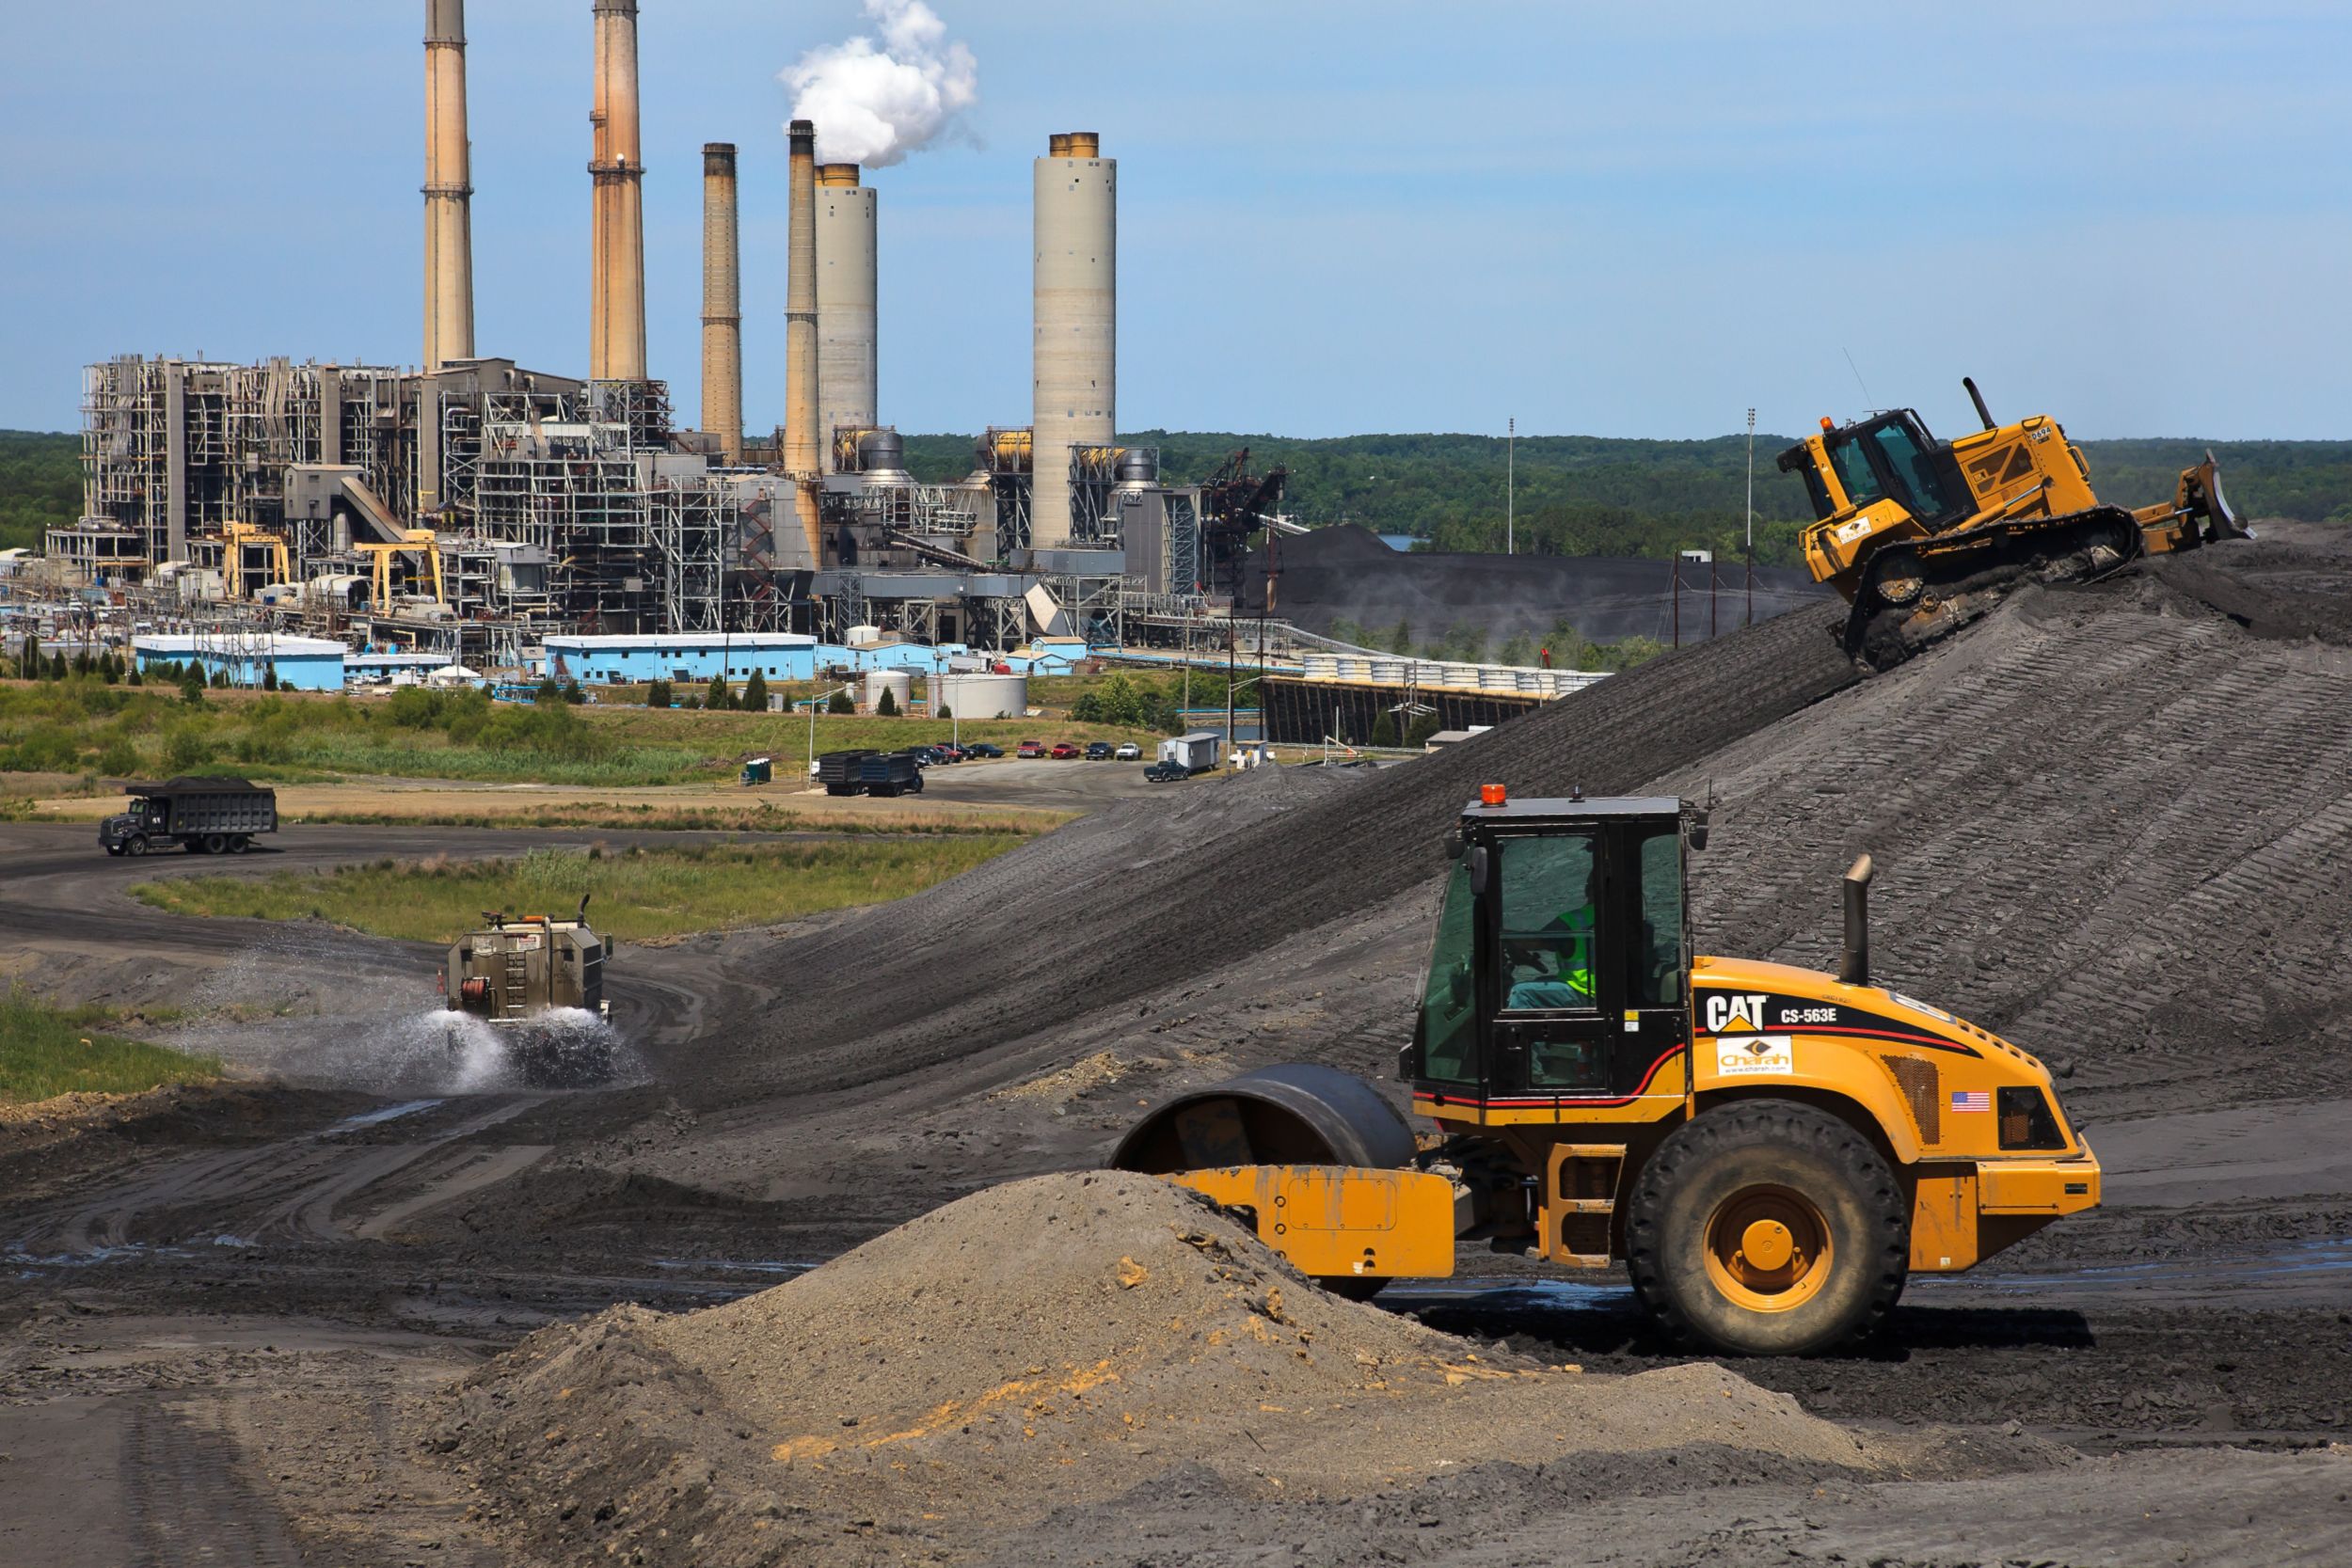 Charah has nearly 140 Cat® machines and 700 employees working in 15 states.